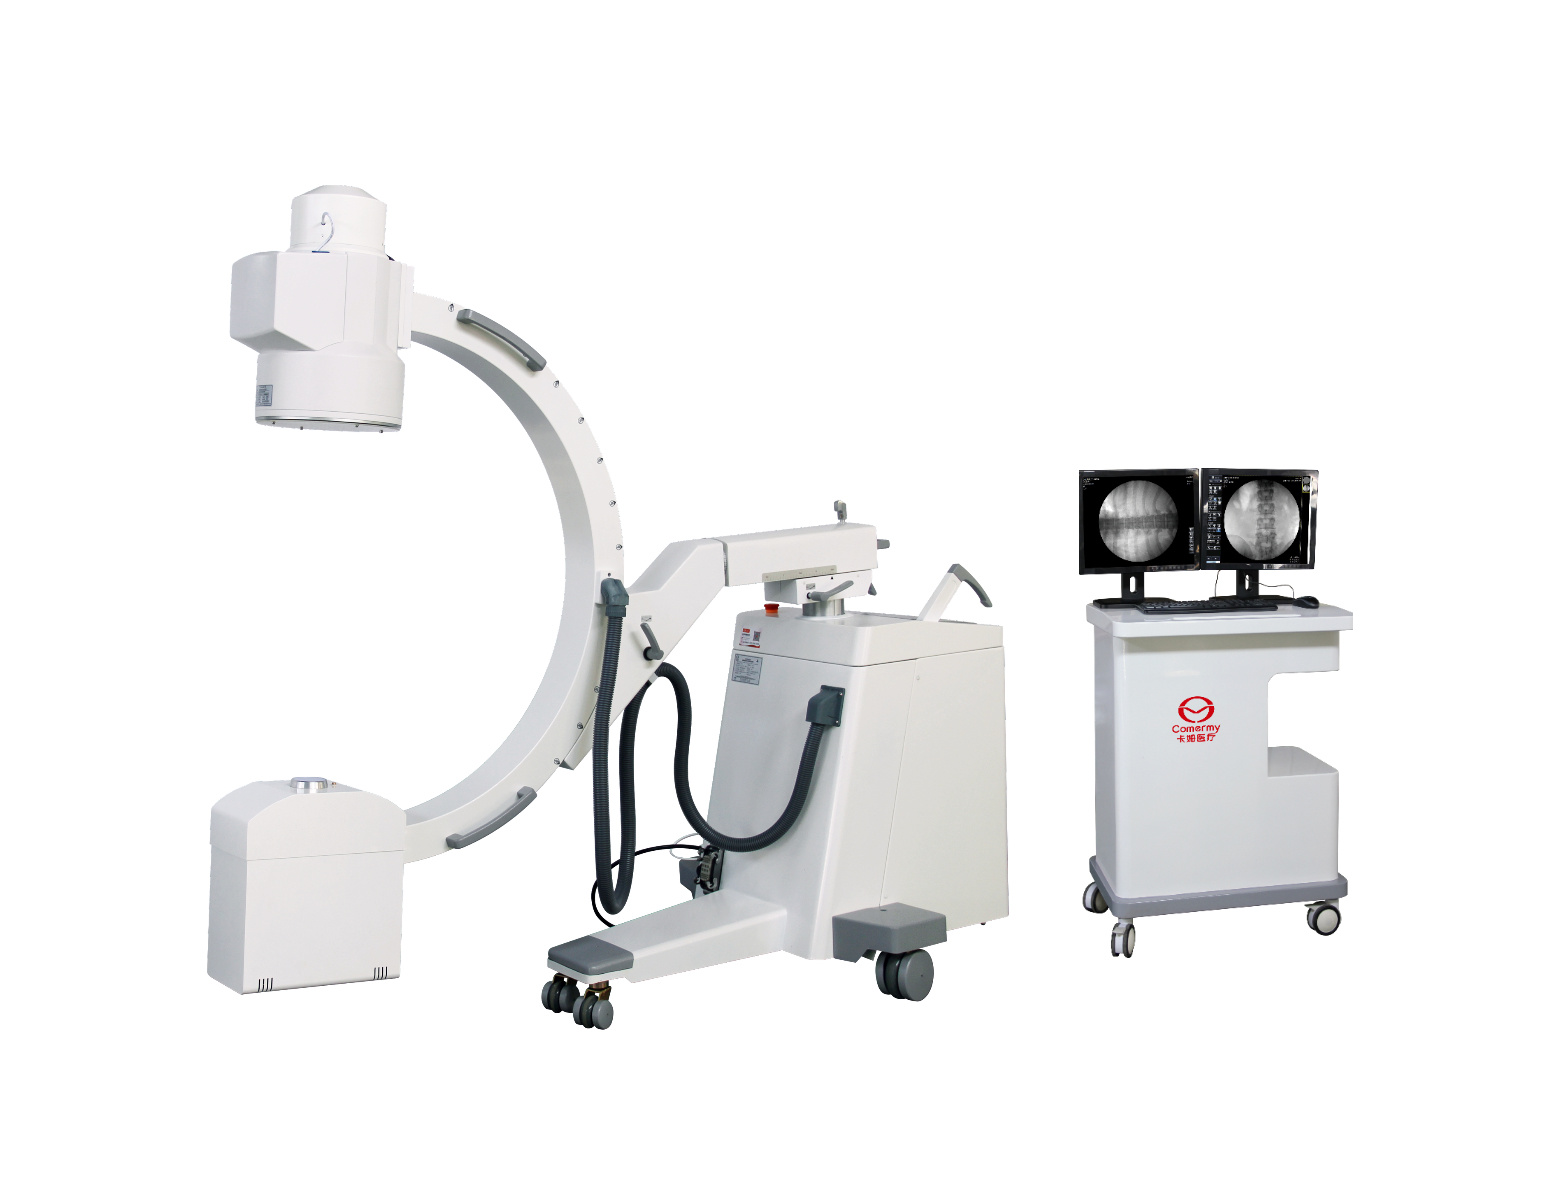 KP5000 high frequency mobile C-arm X-ray machine